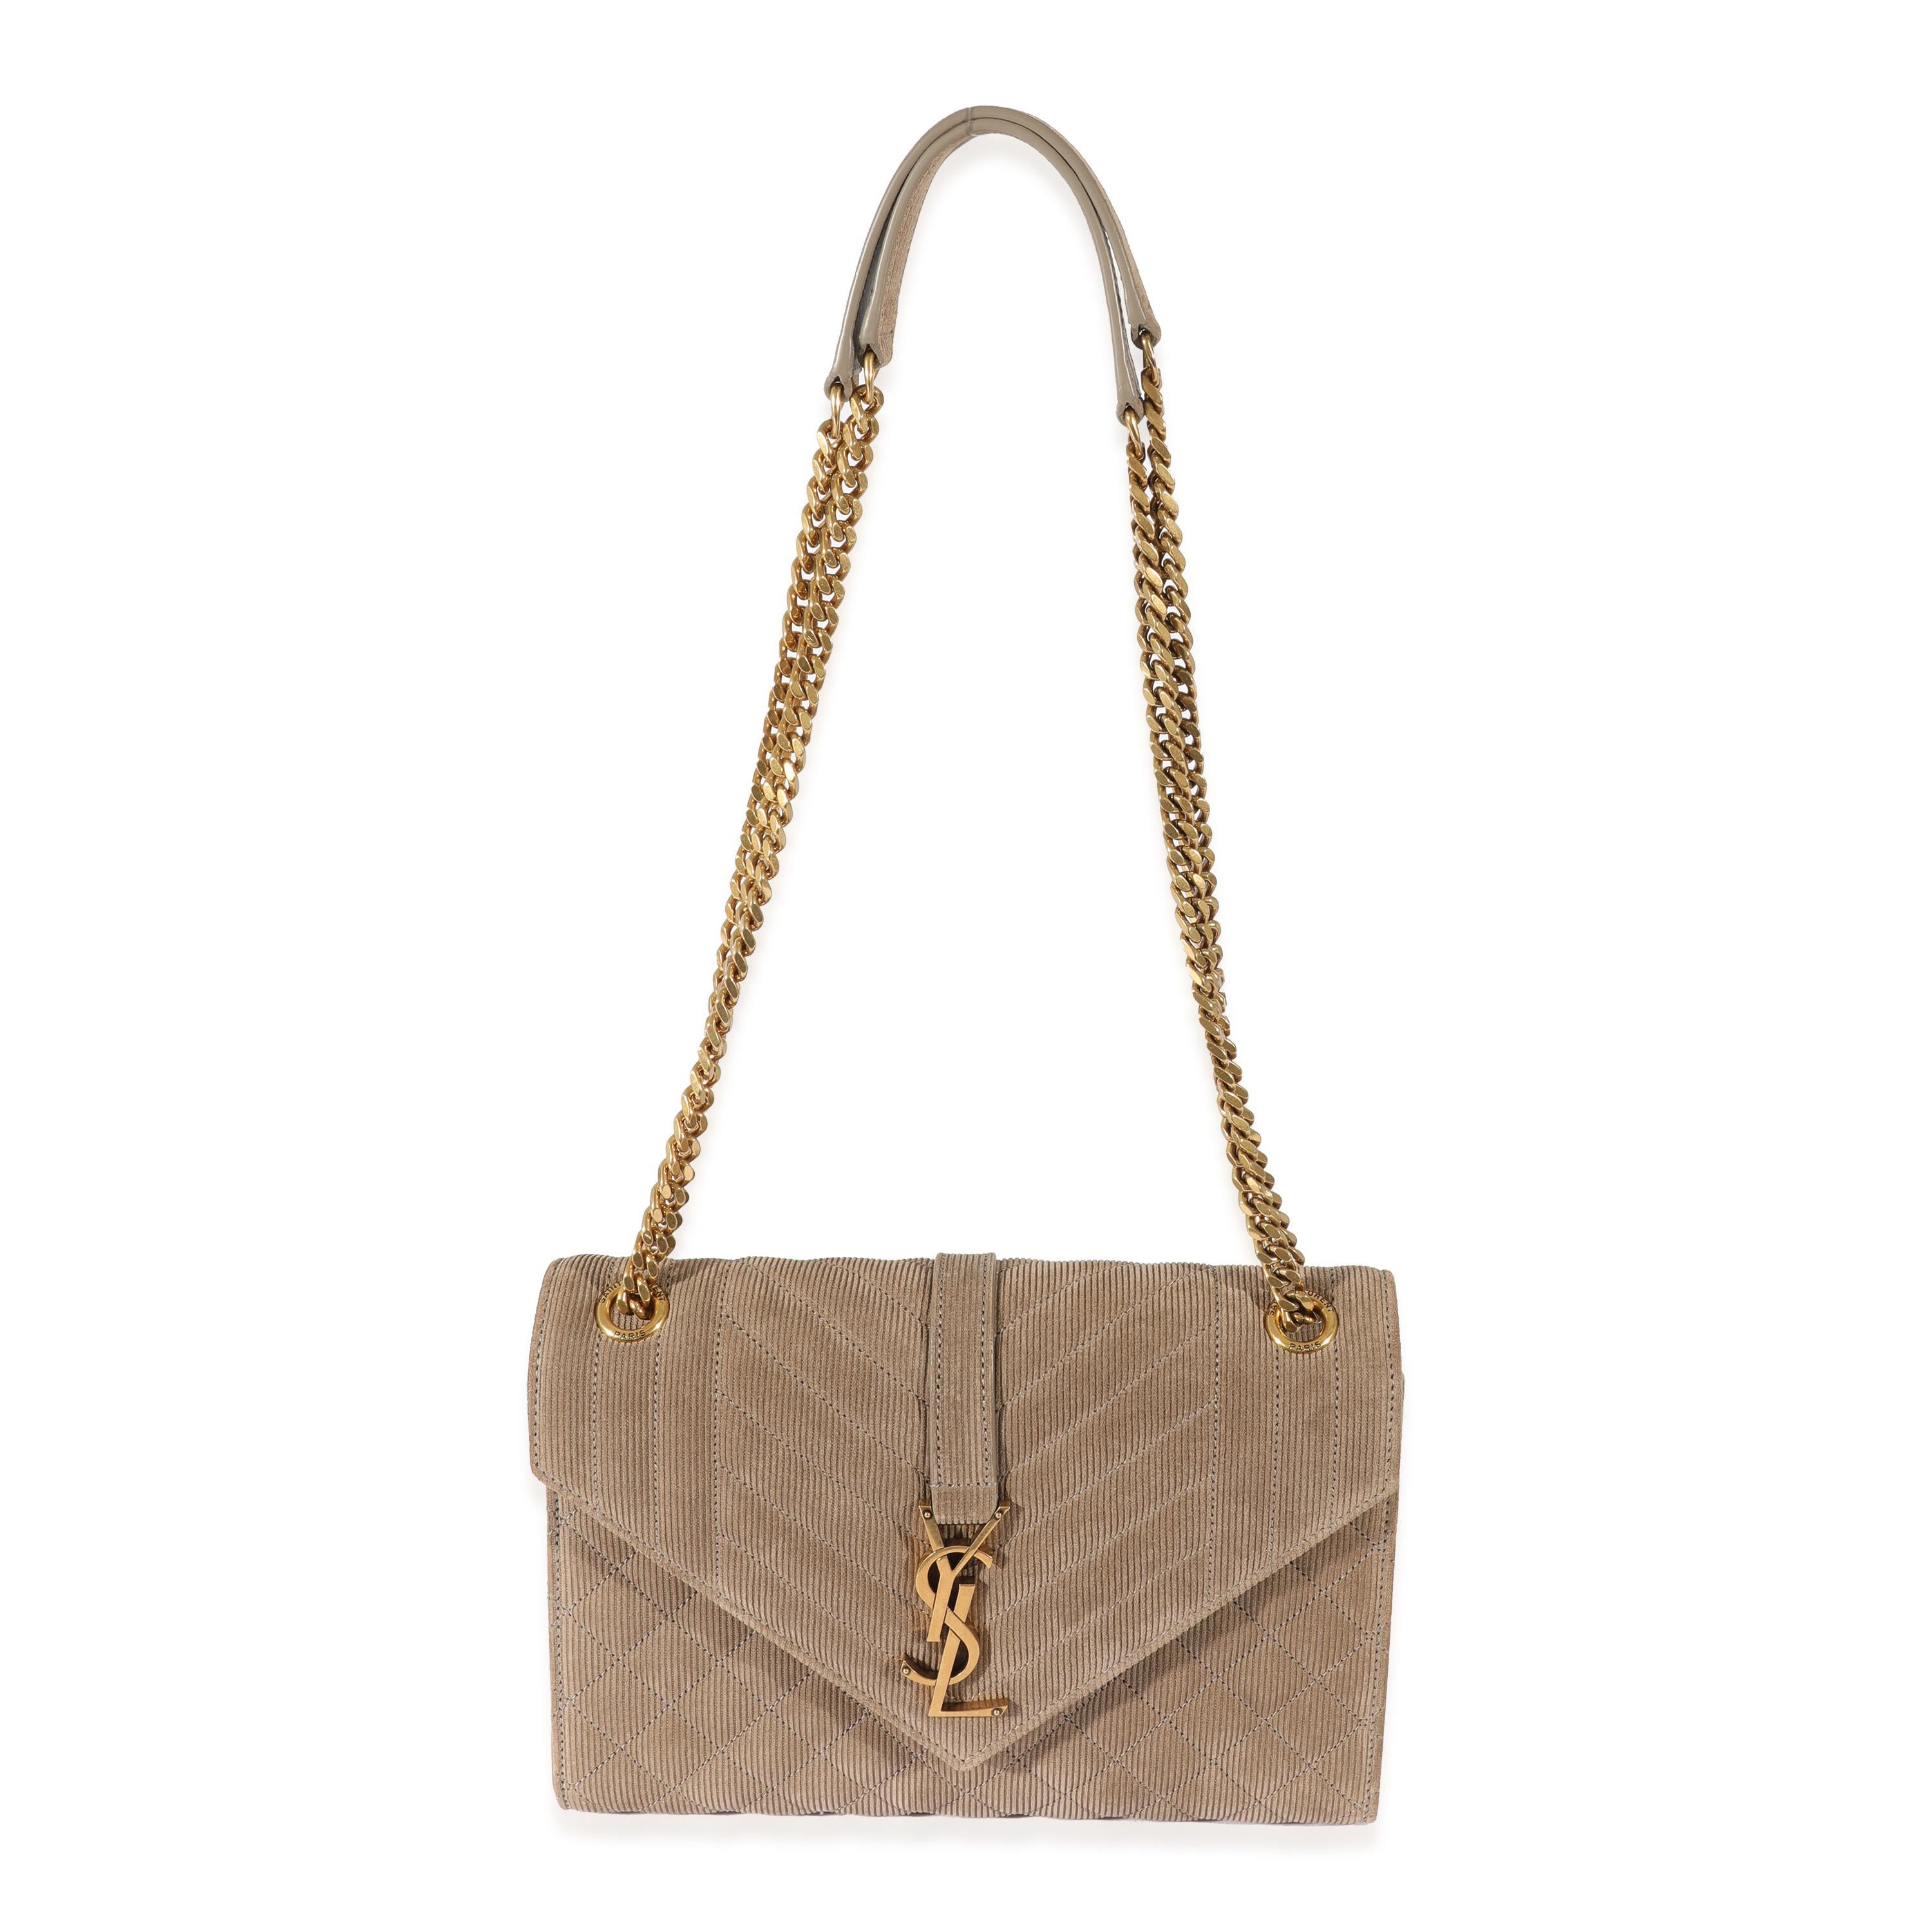 Listing Title: Saint Laurent Beige Corduroy In The Mix Envelope Chain Bag
SKU: 129127
MSRP: 3100.00
Condition: Pre-owned 
Handbag Condition: Very Good
Condition Comments: Very Good Condition Exterior corner scuffing. Light scratching at hardware.